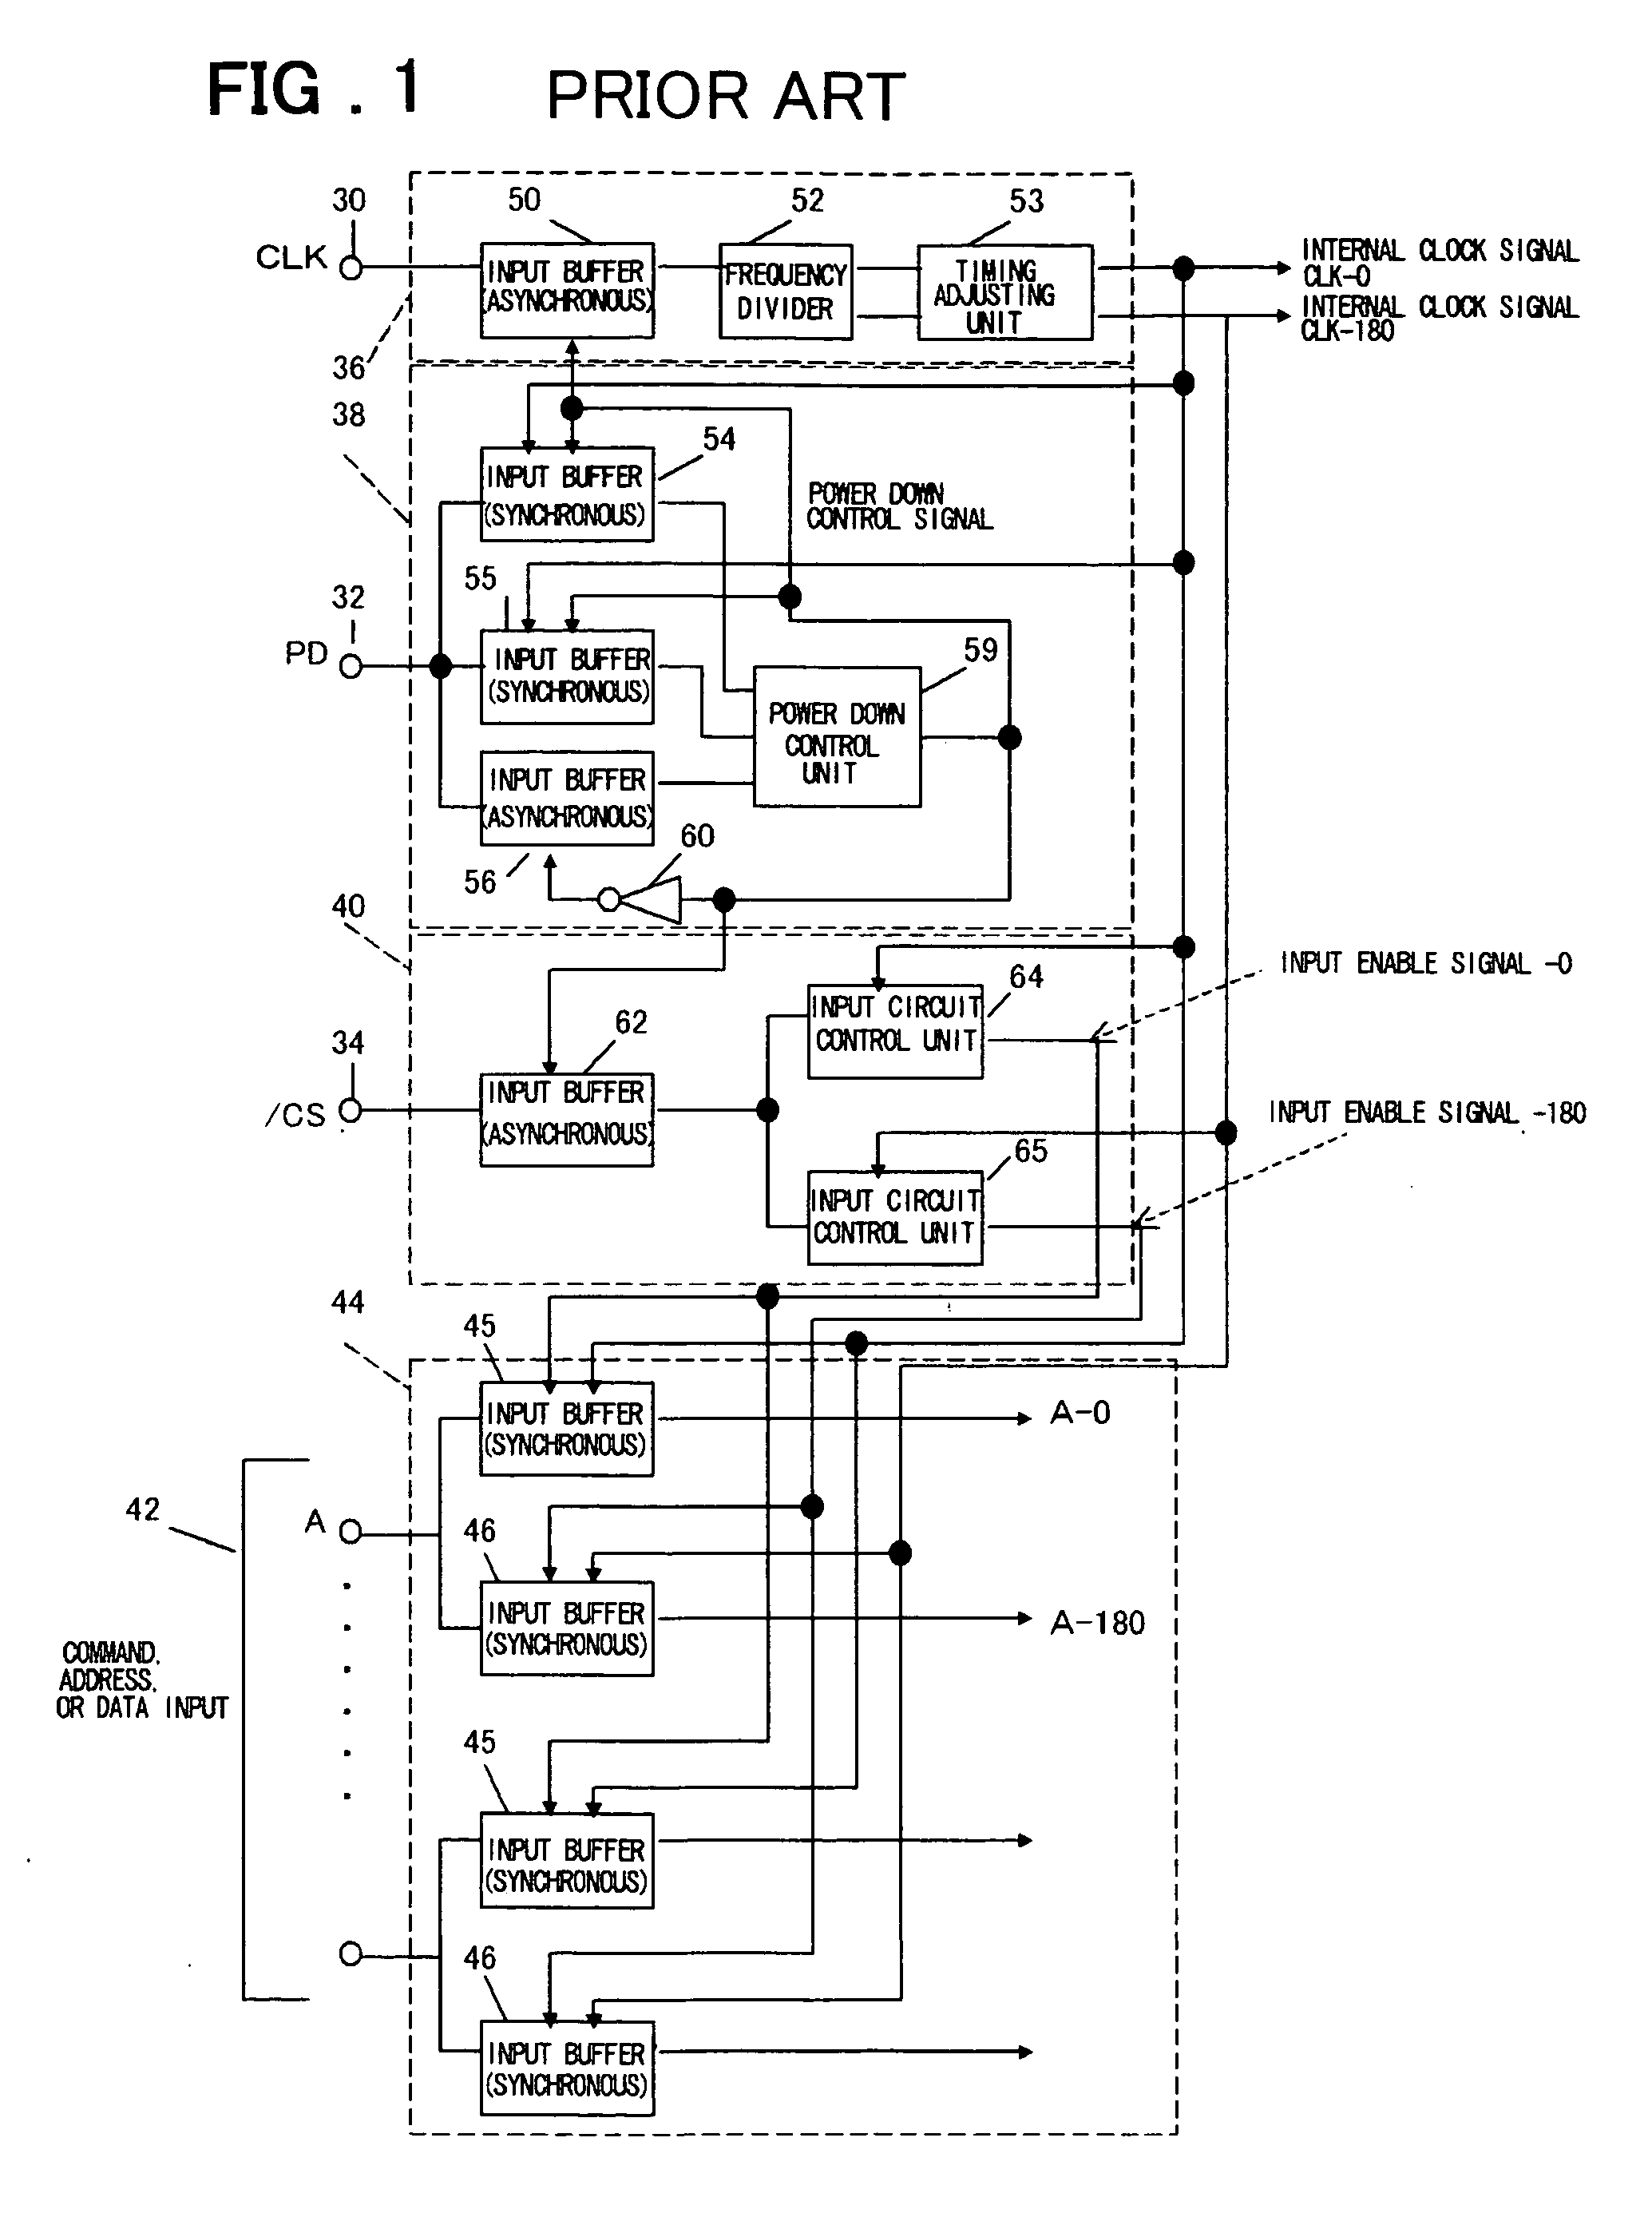 Synchronous type semiconductor device